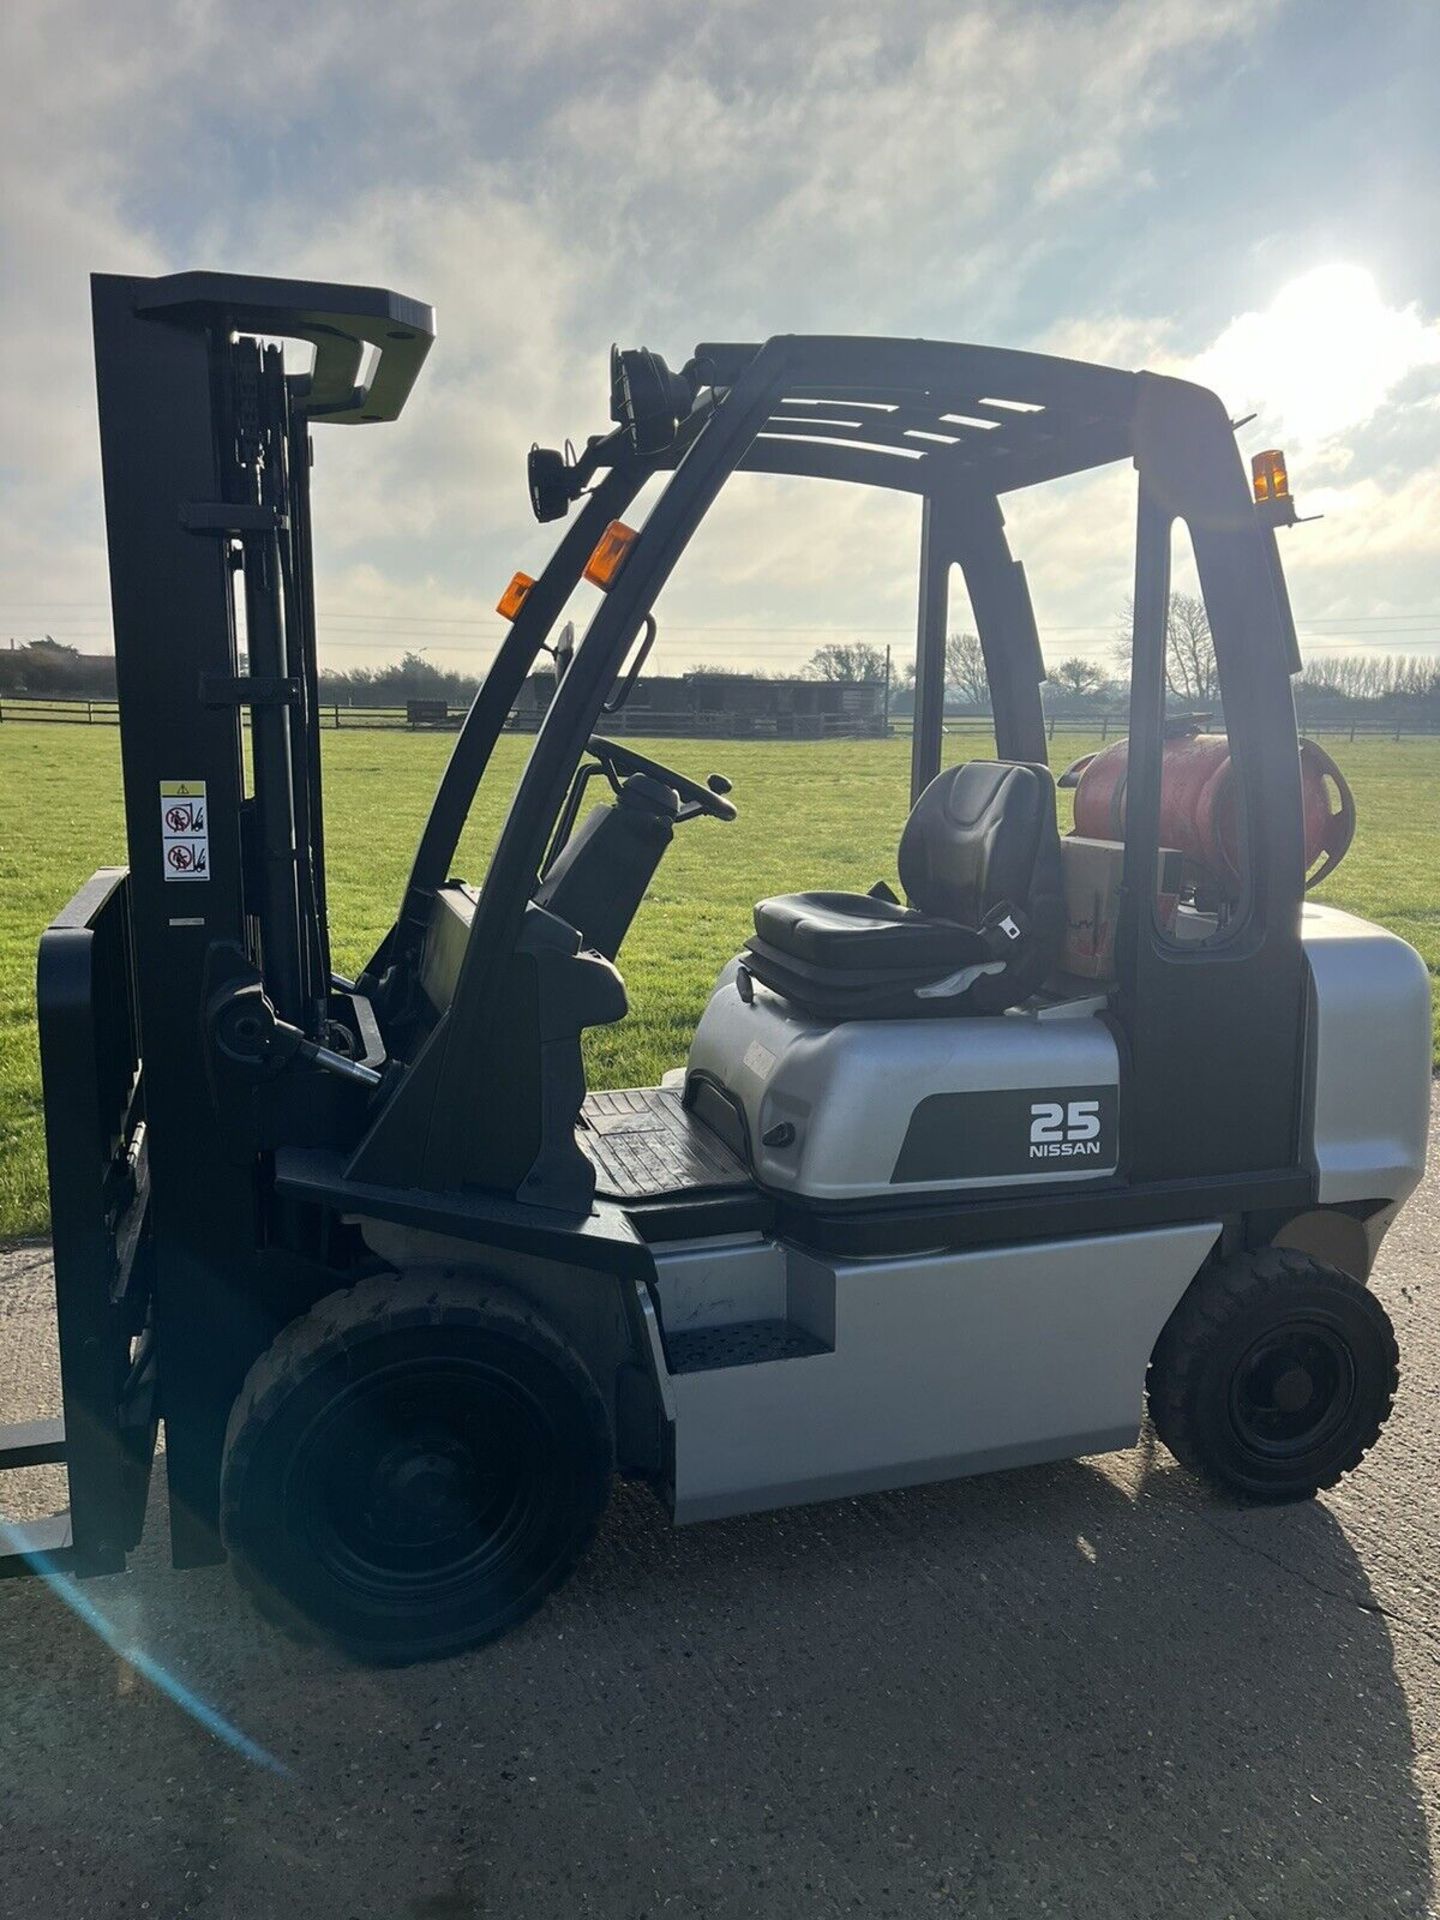 2015 - NISSAN 2.5 Gas Forklift Truck (Container Spec) - Image 5 of 5